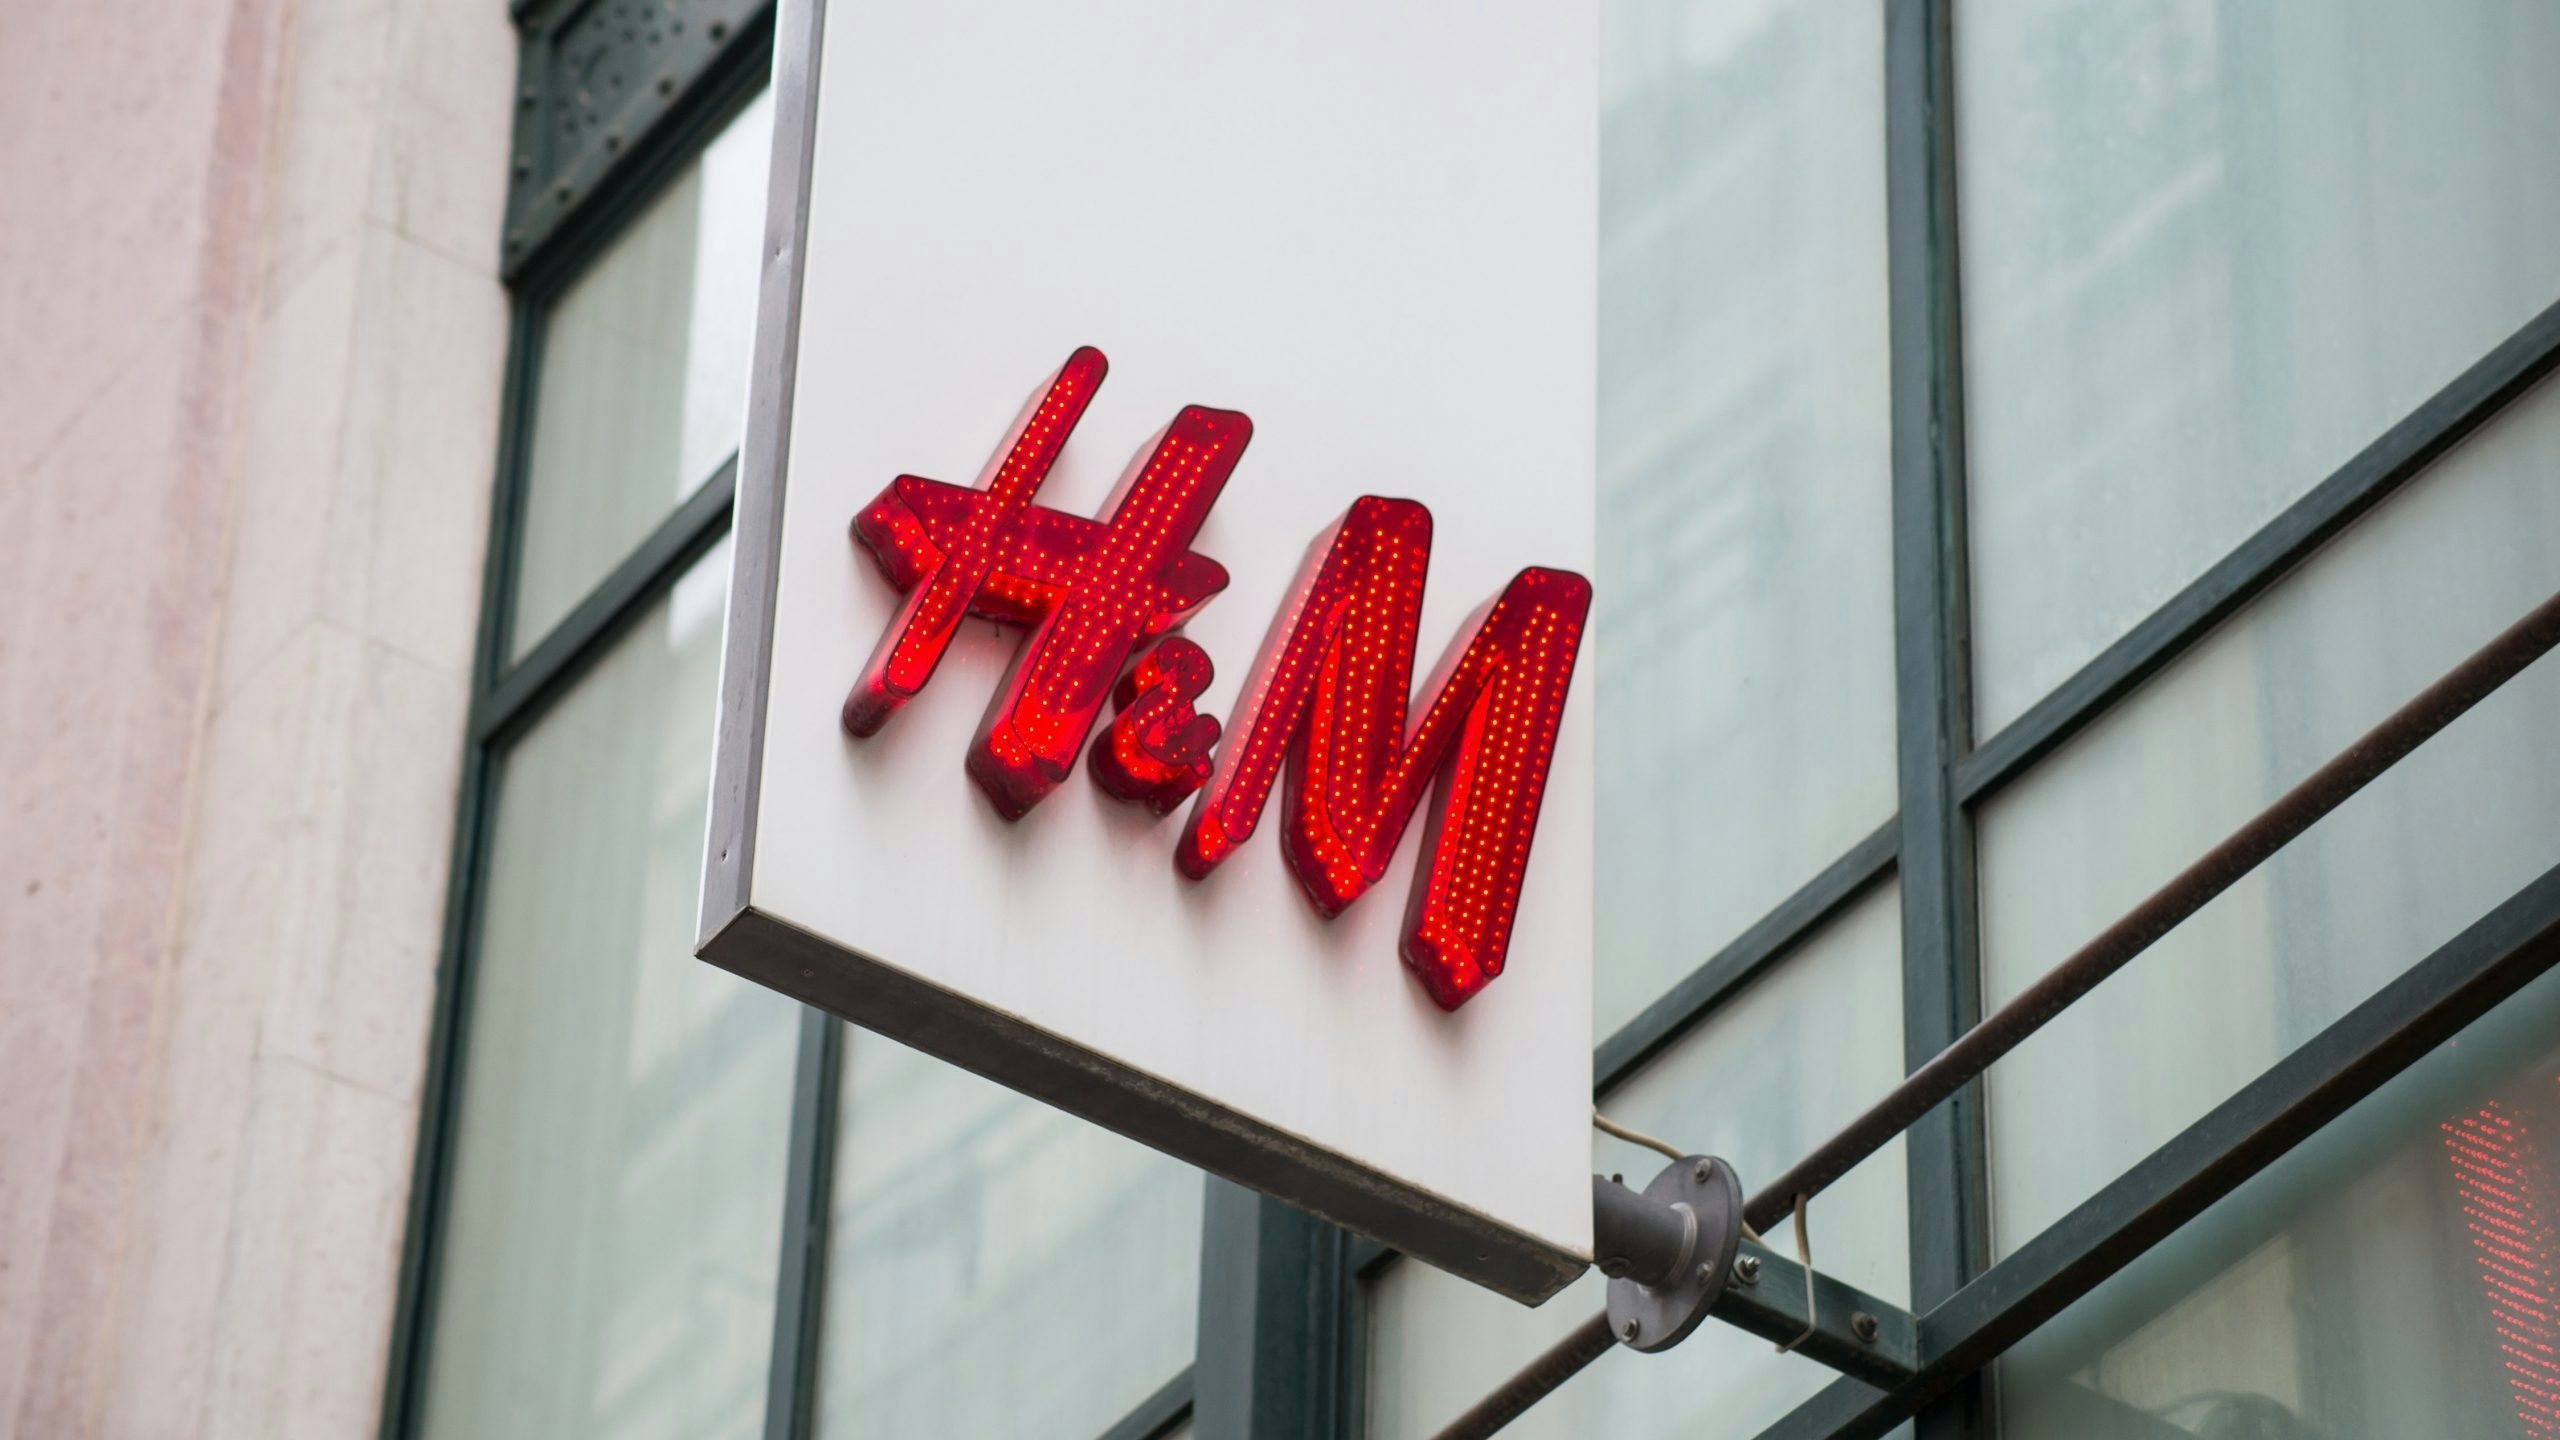 H&M has returned to Alibaba's Tmall platform 16 months after the Xinjiang backlash. But can the fast fashion company ever win back local shoppers? Photo: Shutterstock